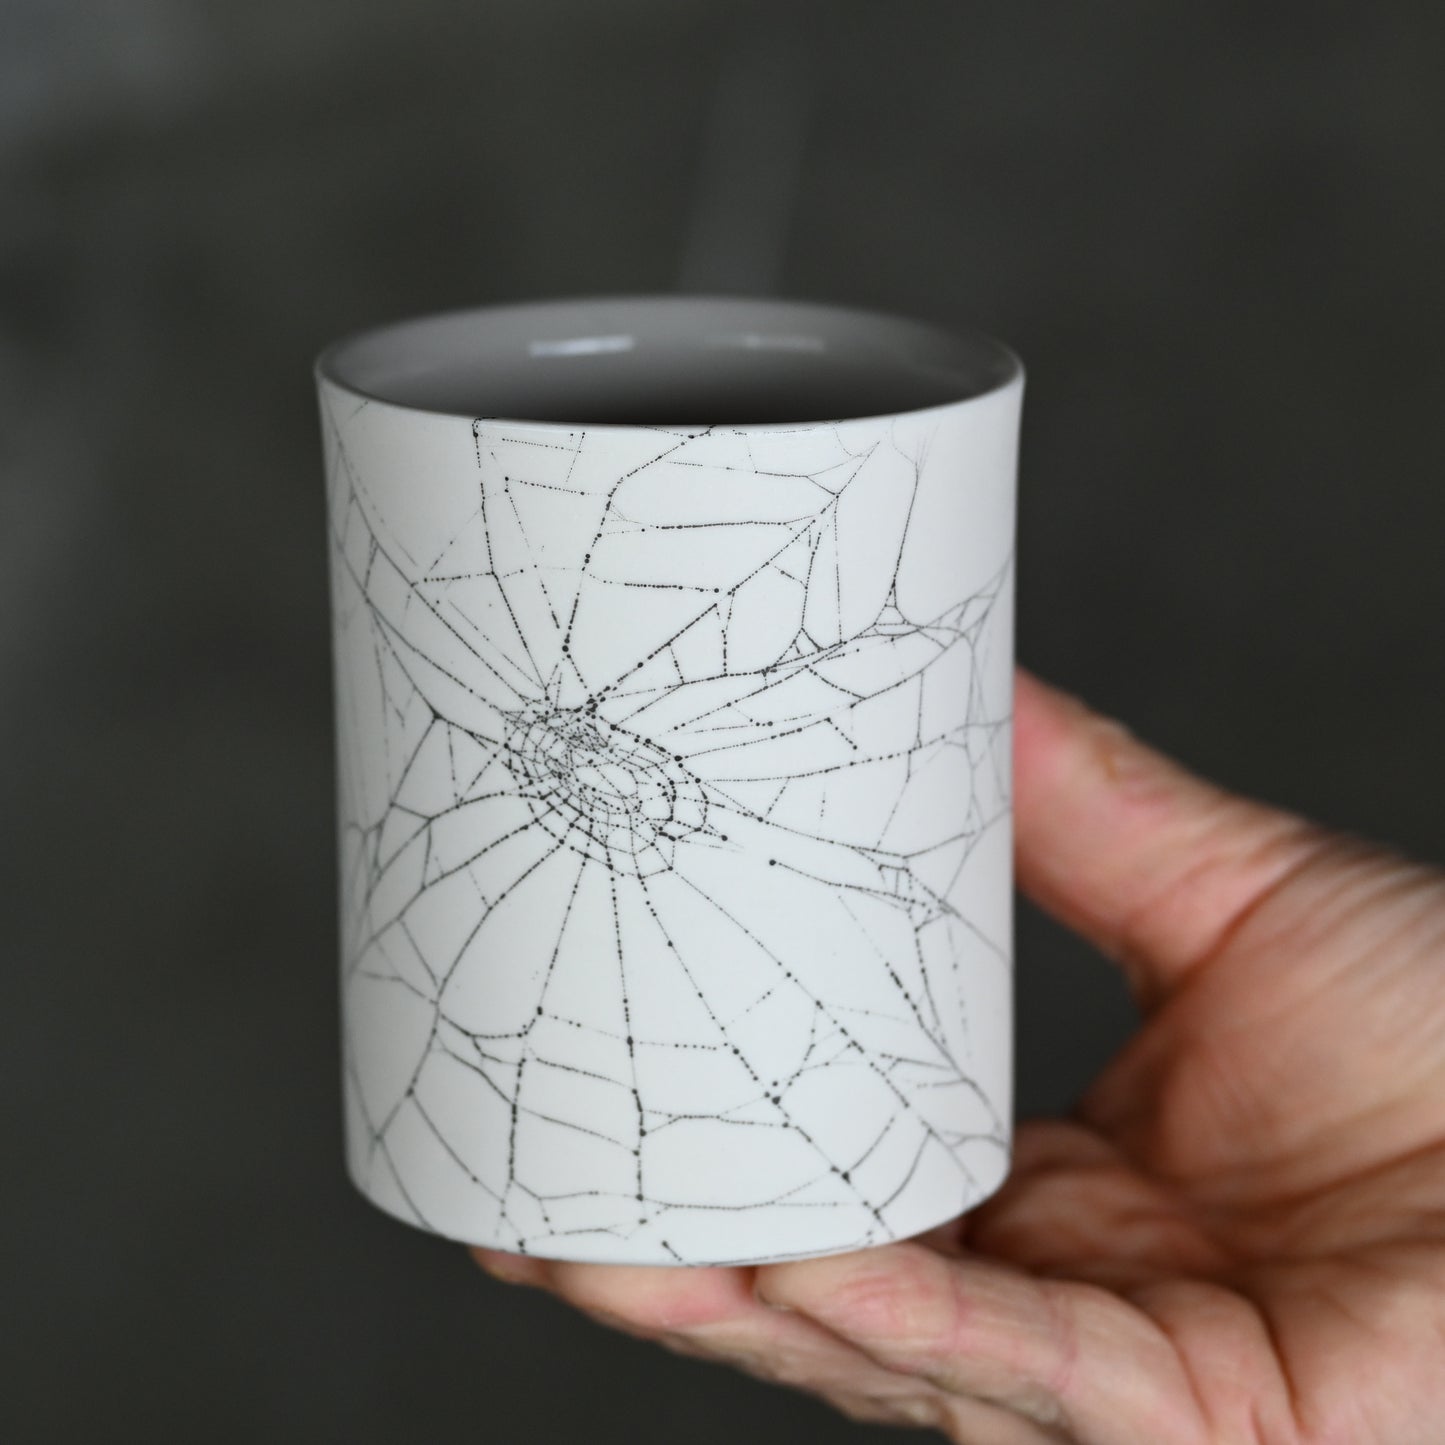 Web on Clay (164), Collected September 19, 2022